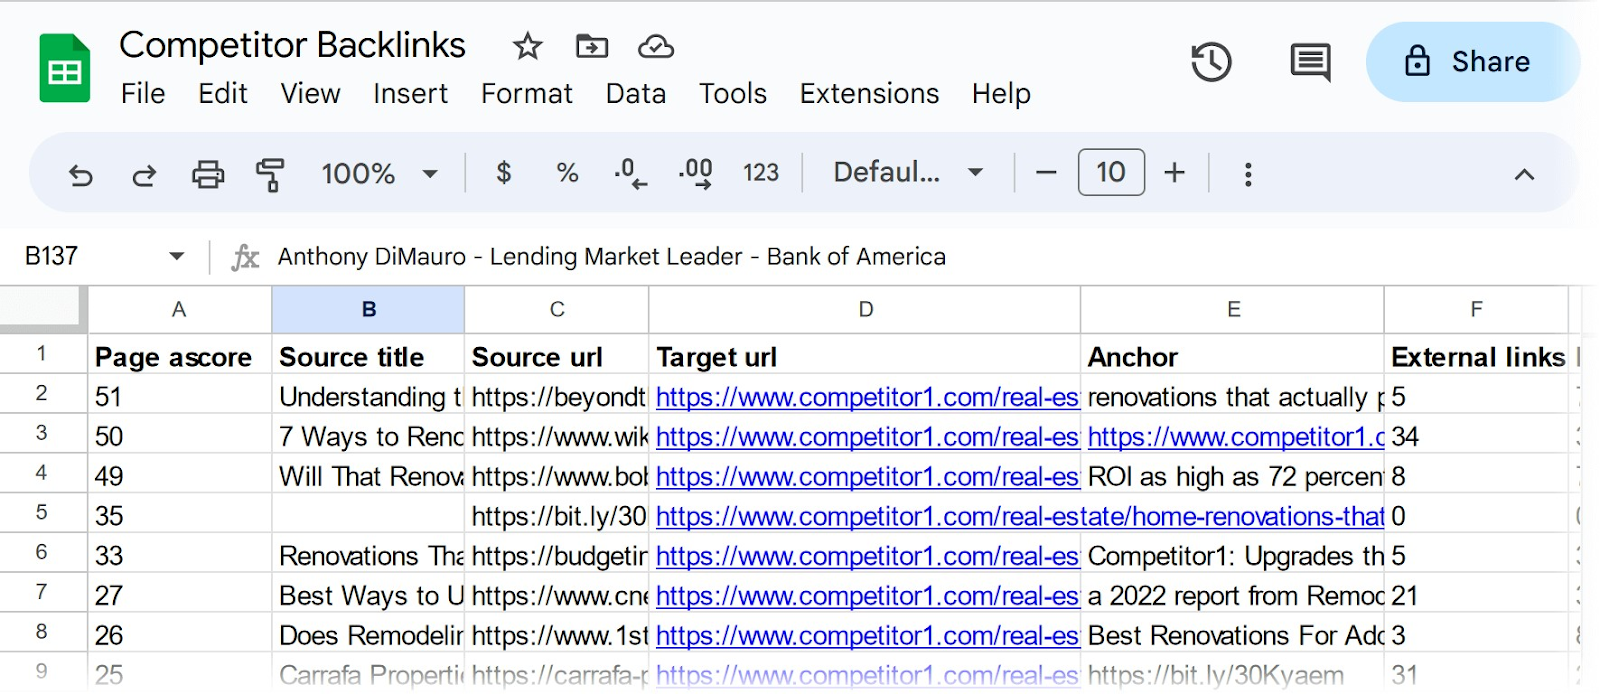 "Competitor Backlinks" exported in Google spreadsheet